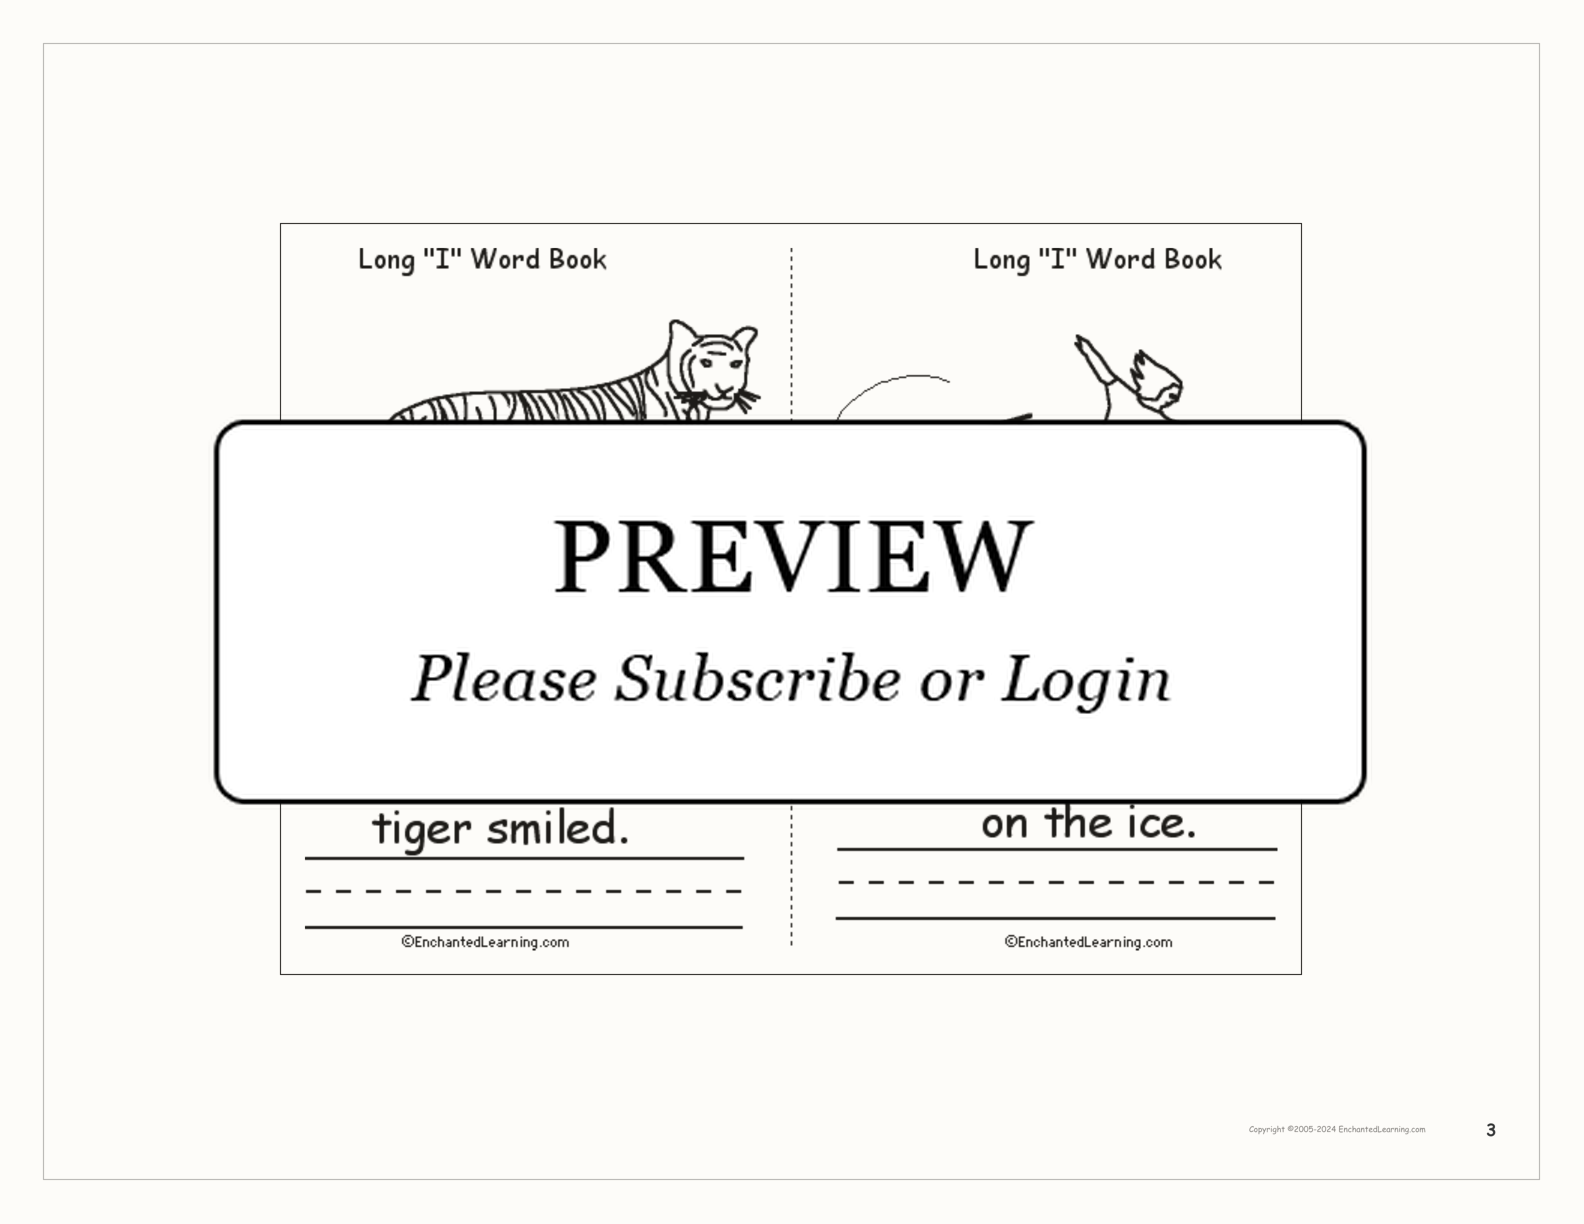 Long 'I' Words Book interactive printout page 3